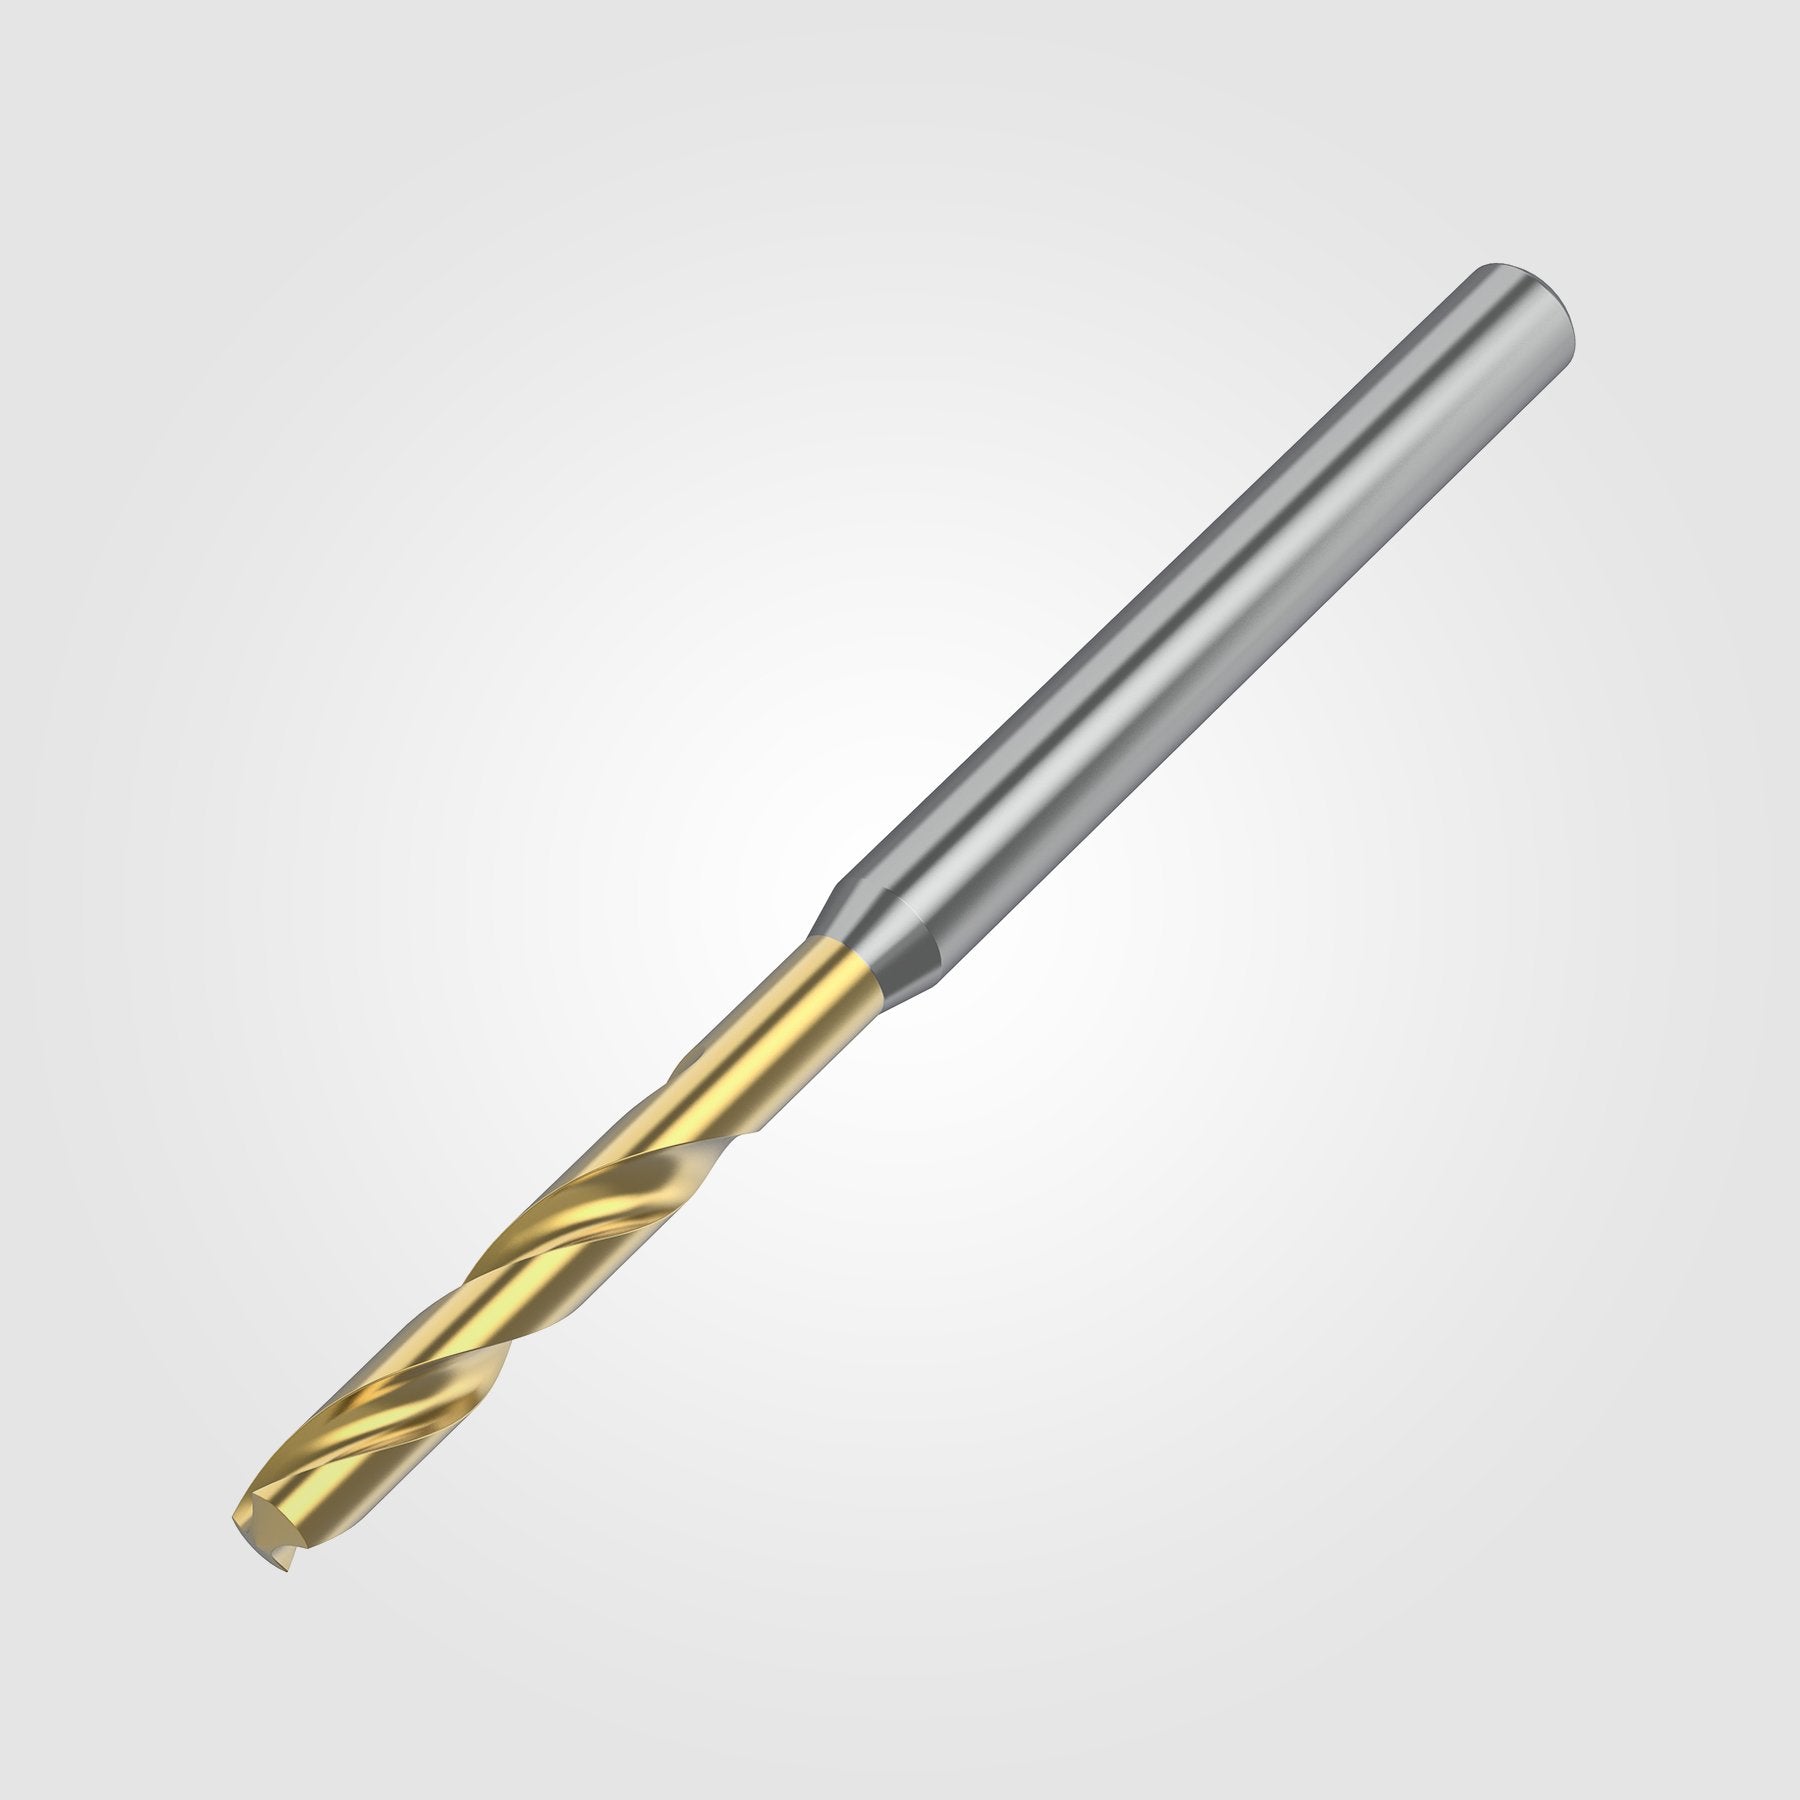 GOdrill (THROUGH COOLANT) | 1.7mm / .0669" / 5xD | SOLID CARBIDE DRILL | 4149145